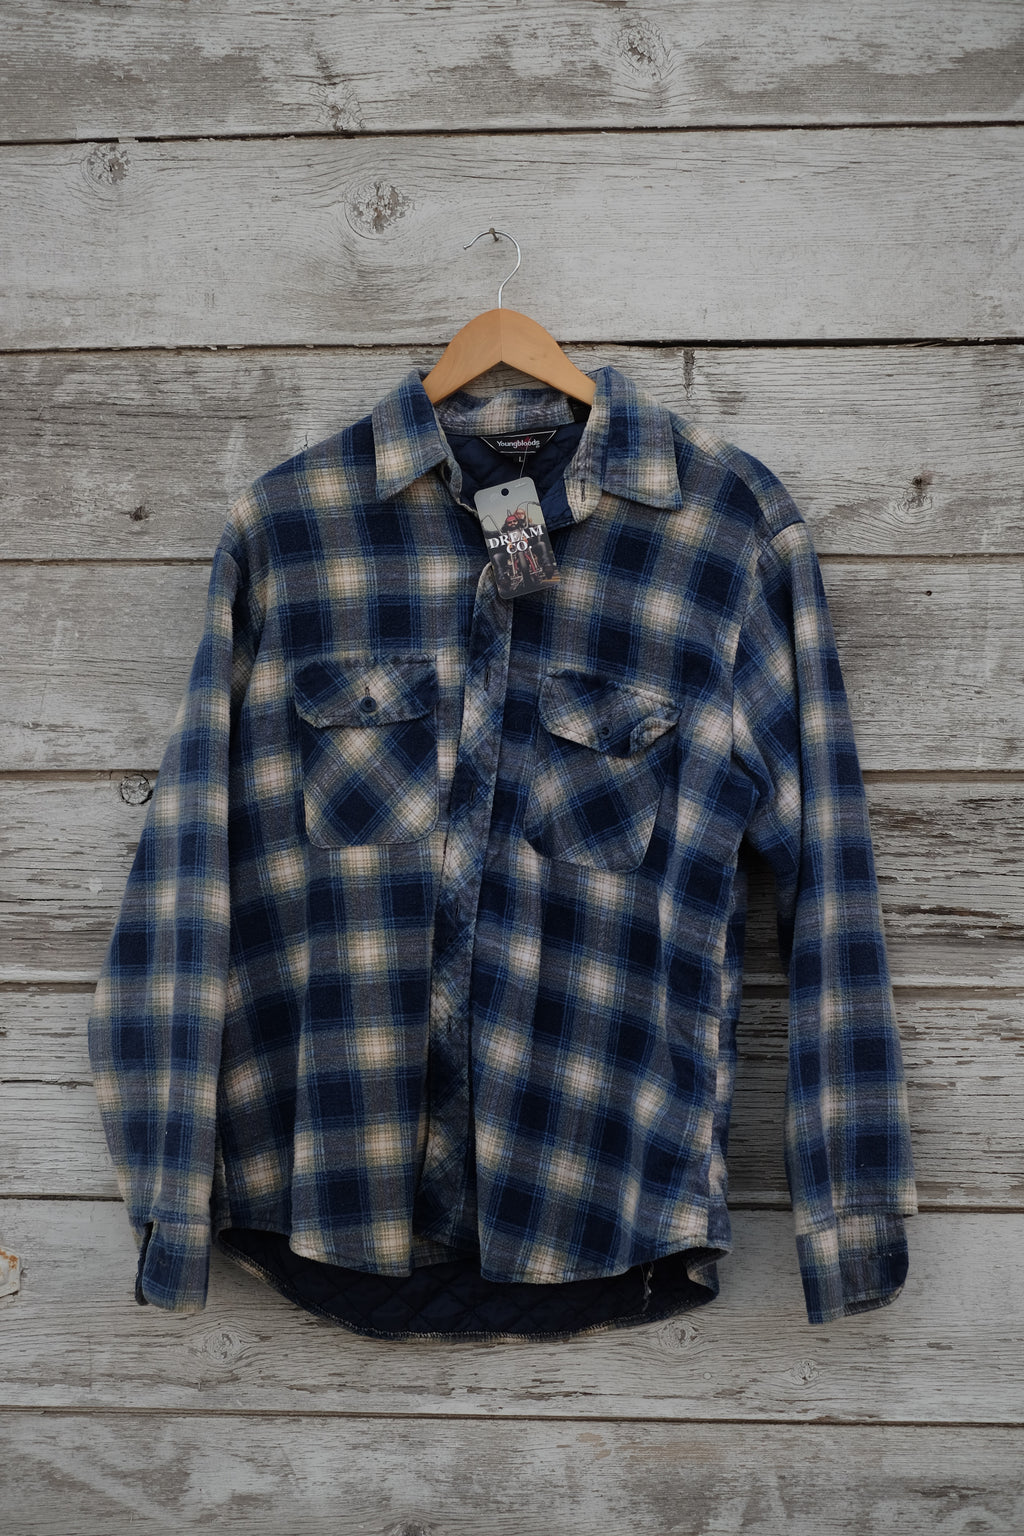 Vintage Youngbloods Flannel